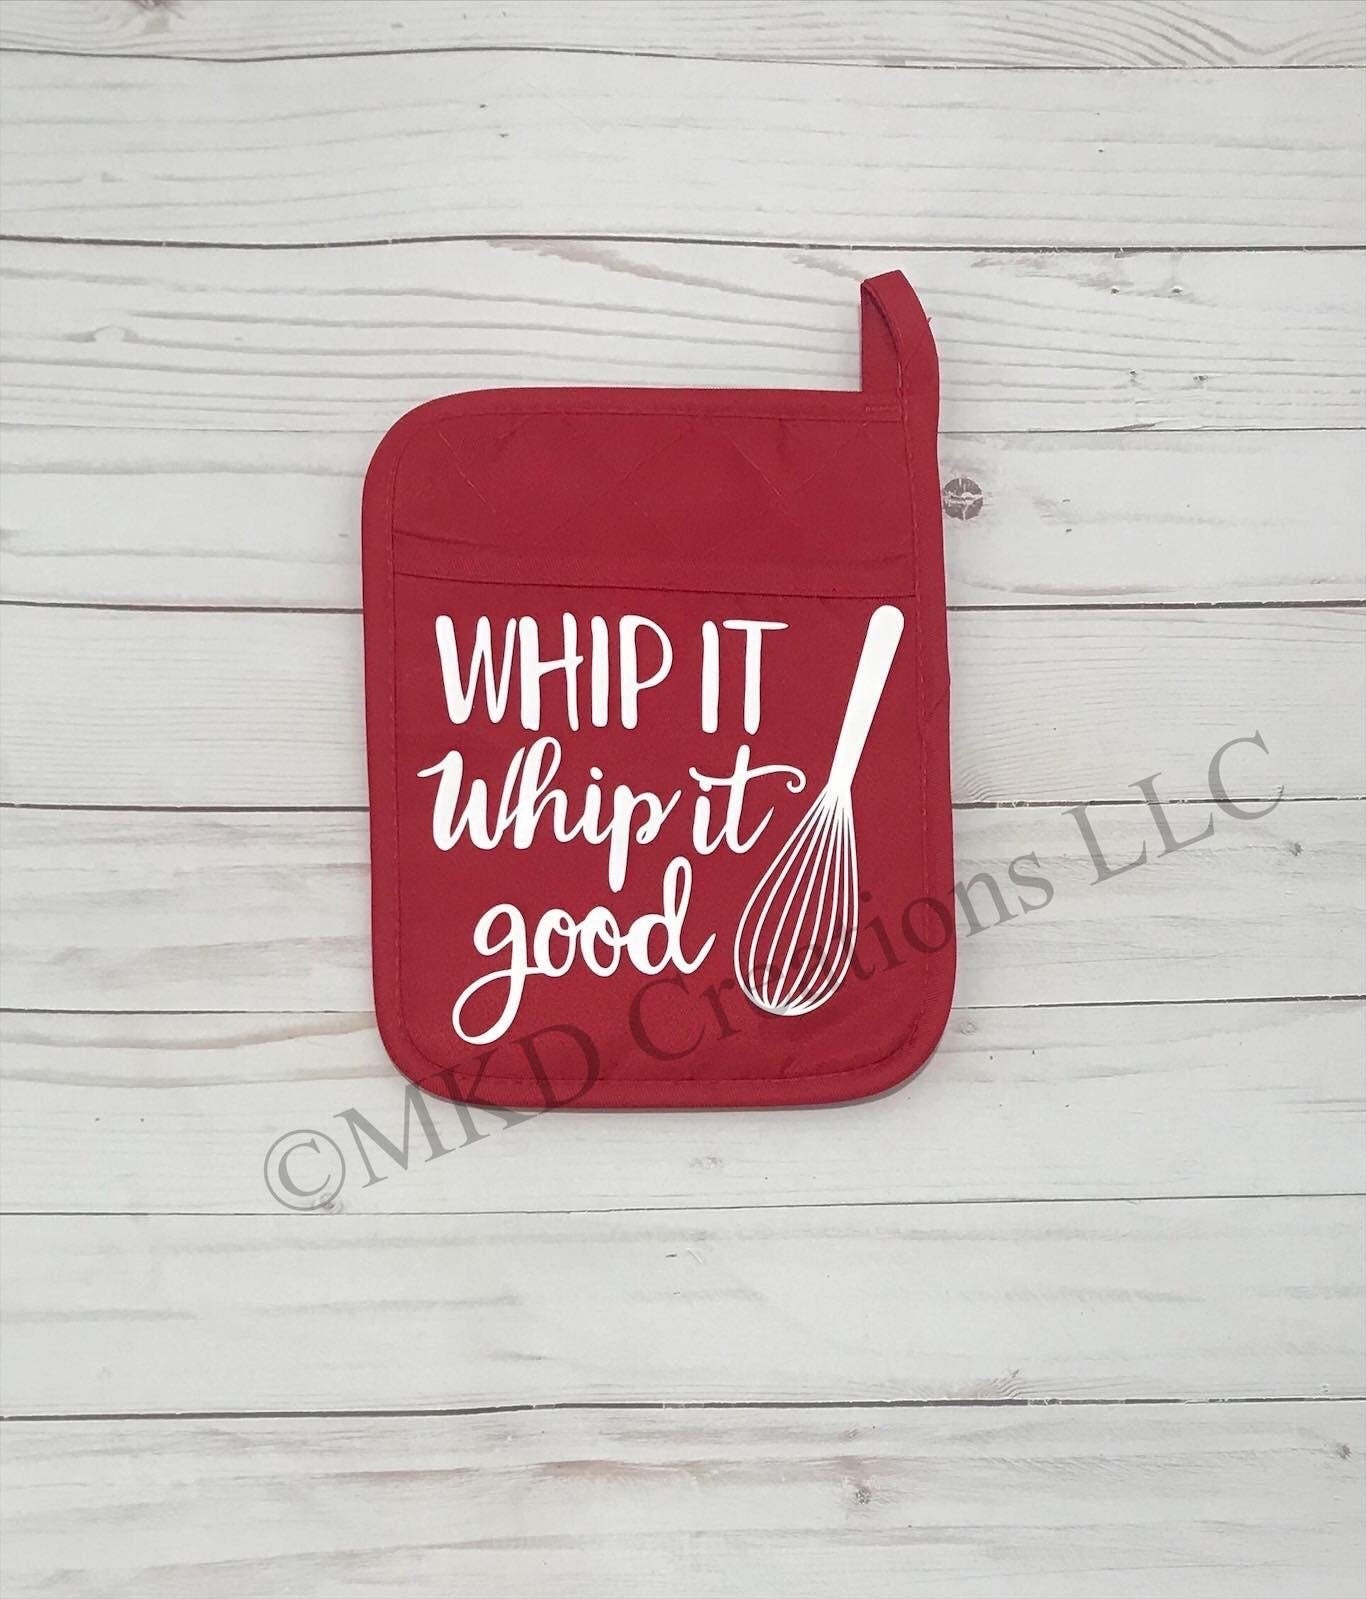 Pot Holders only "Whip it, Whip it good" | Pot holder colors available Black | Teal | Red | Gray |